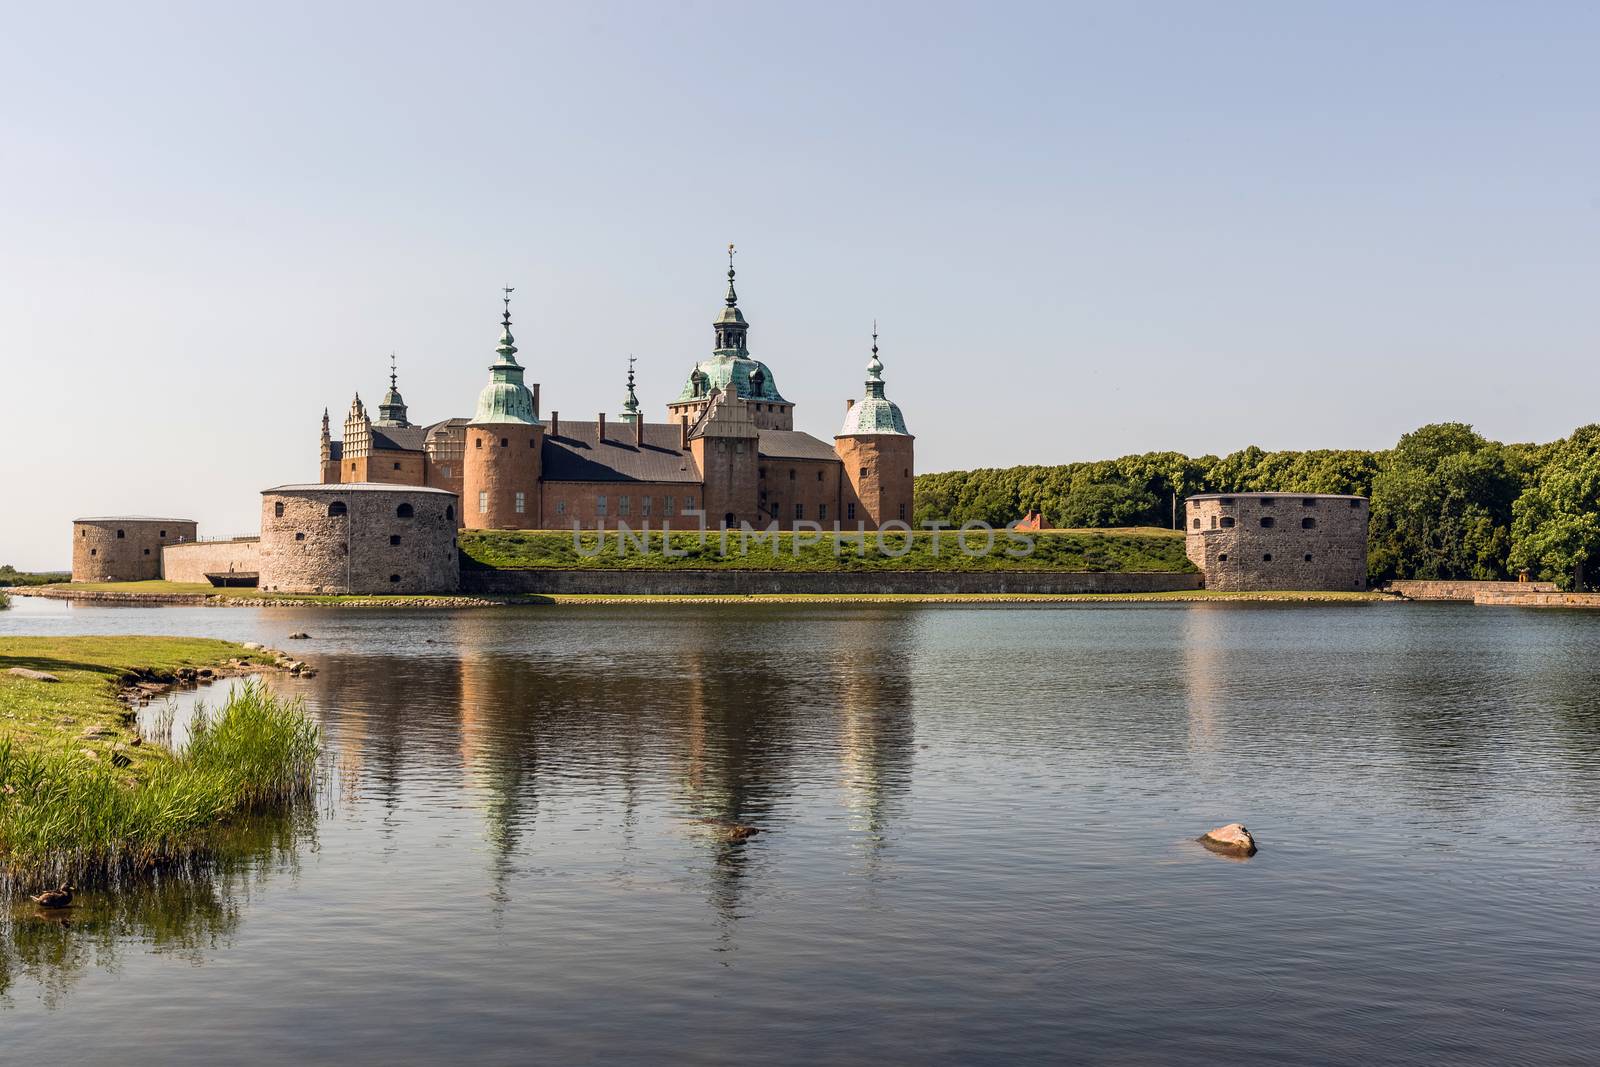 The legendary Kalmar castle dating back 800 years, reached its current design during the 16th century, when rebuilt by Vasa kings from the medieval castle into a Renaissance palace.